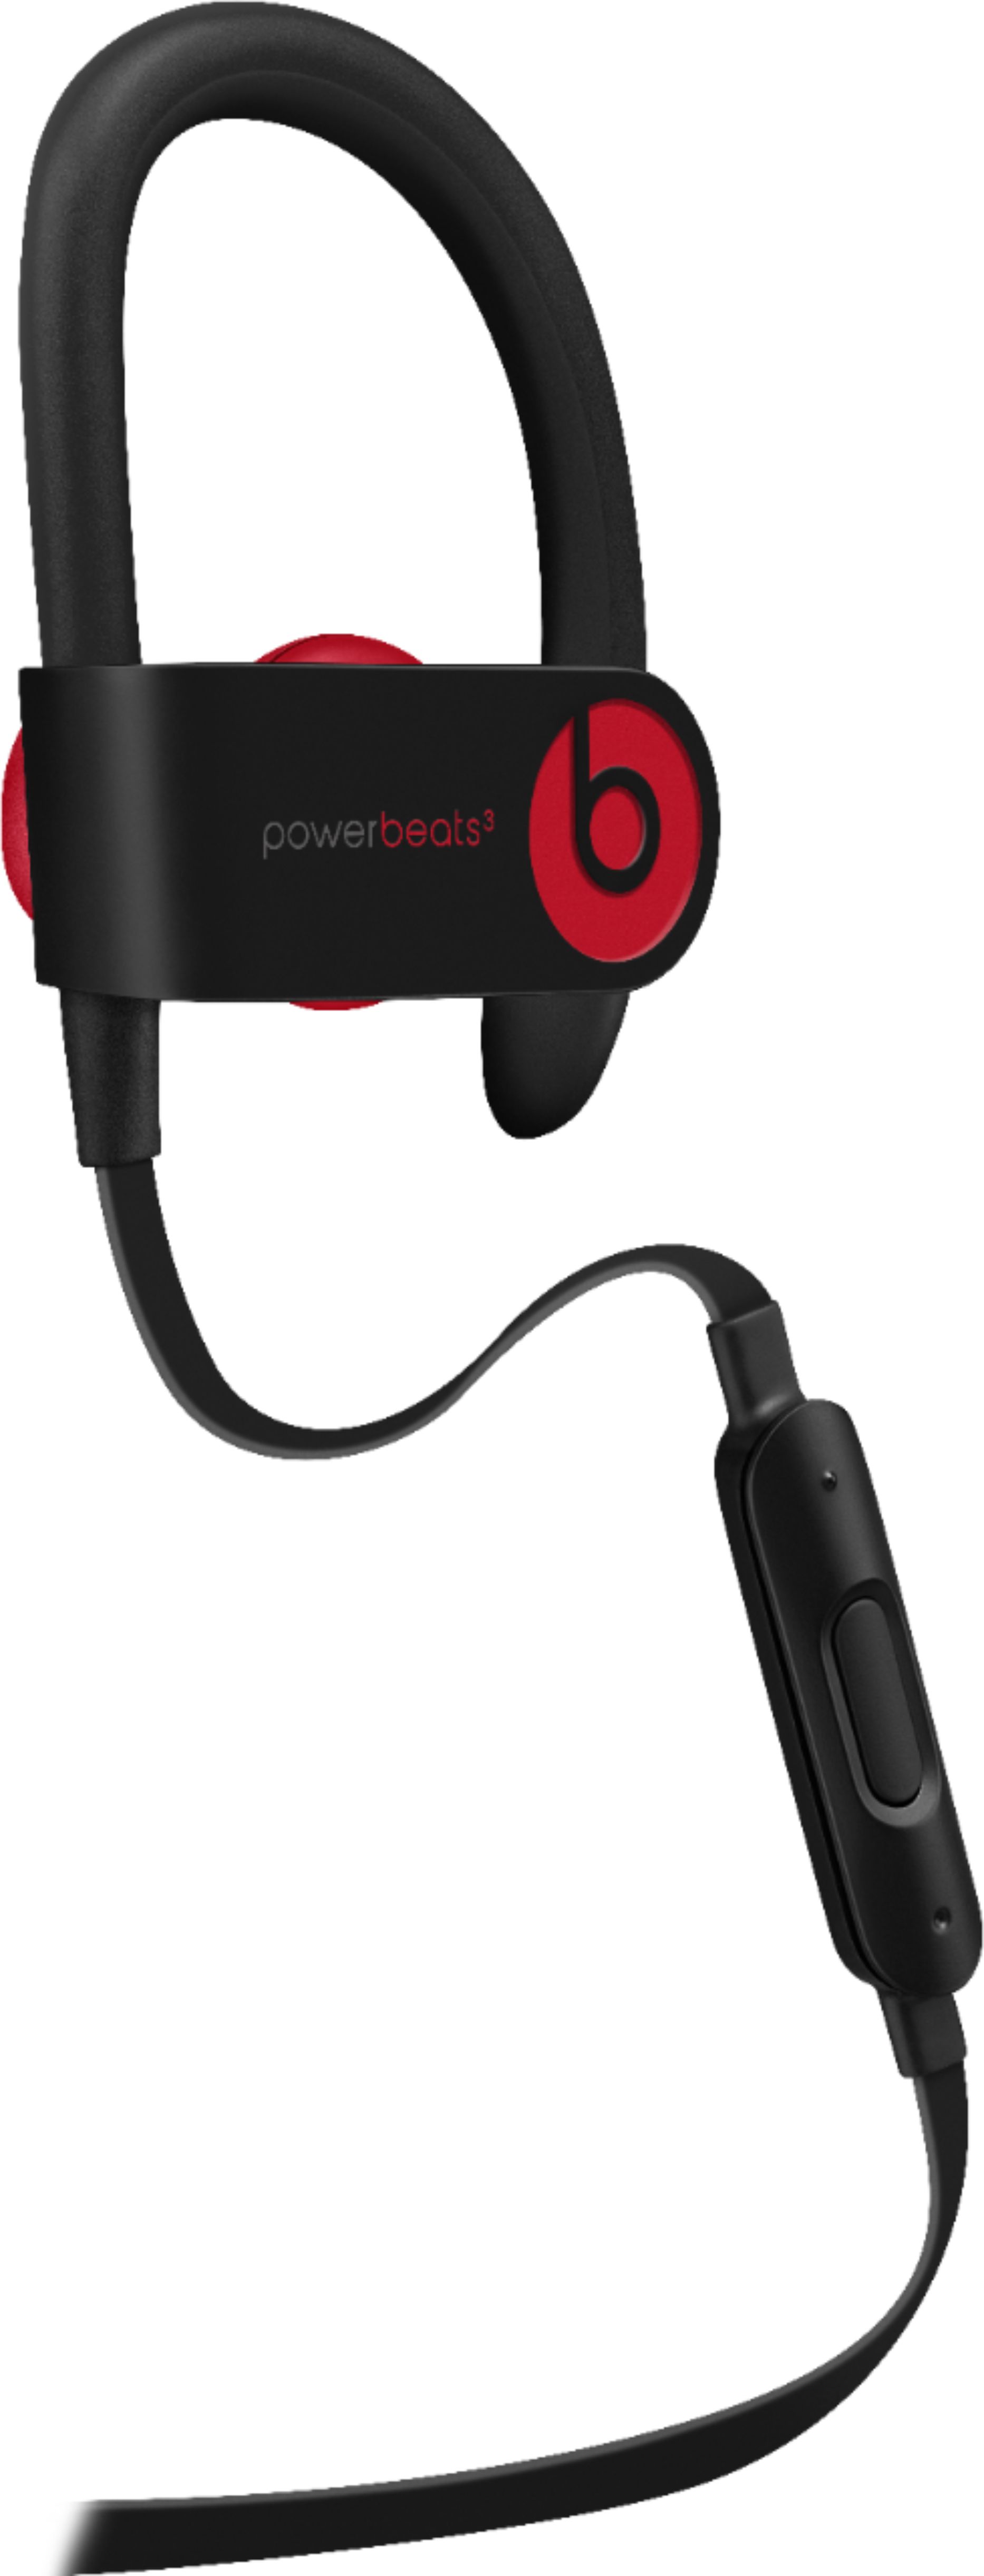 powerbeats 3 wireless black and red